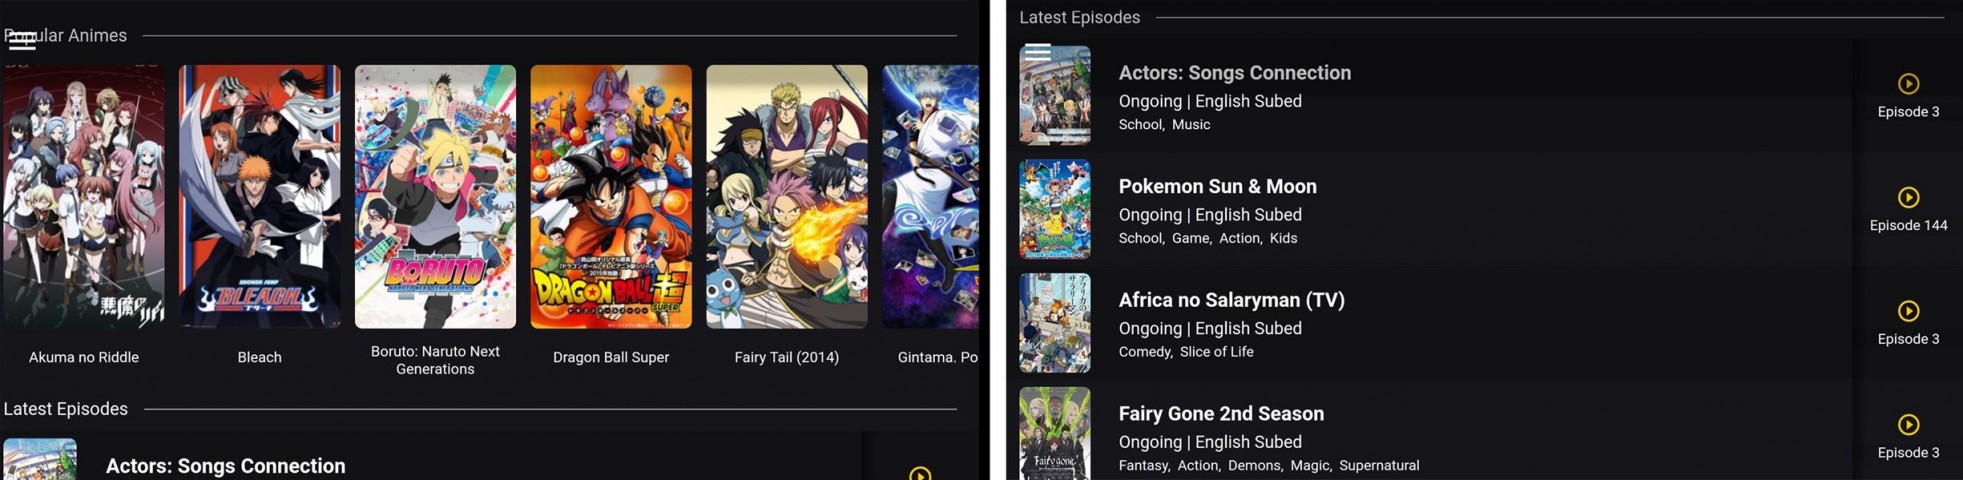 Animania APK for Android - Download